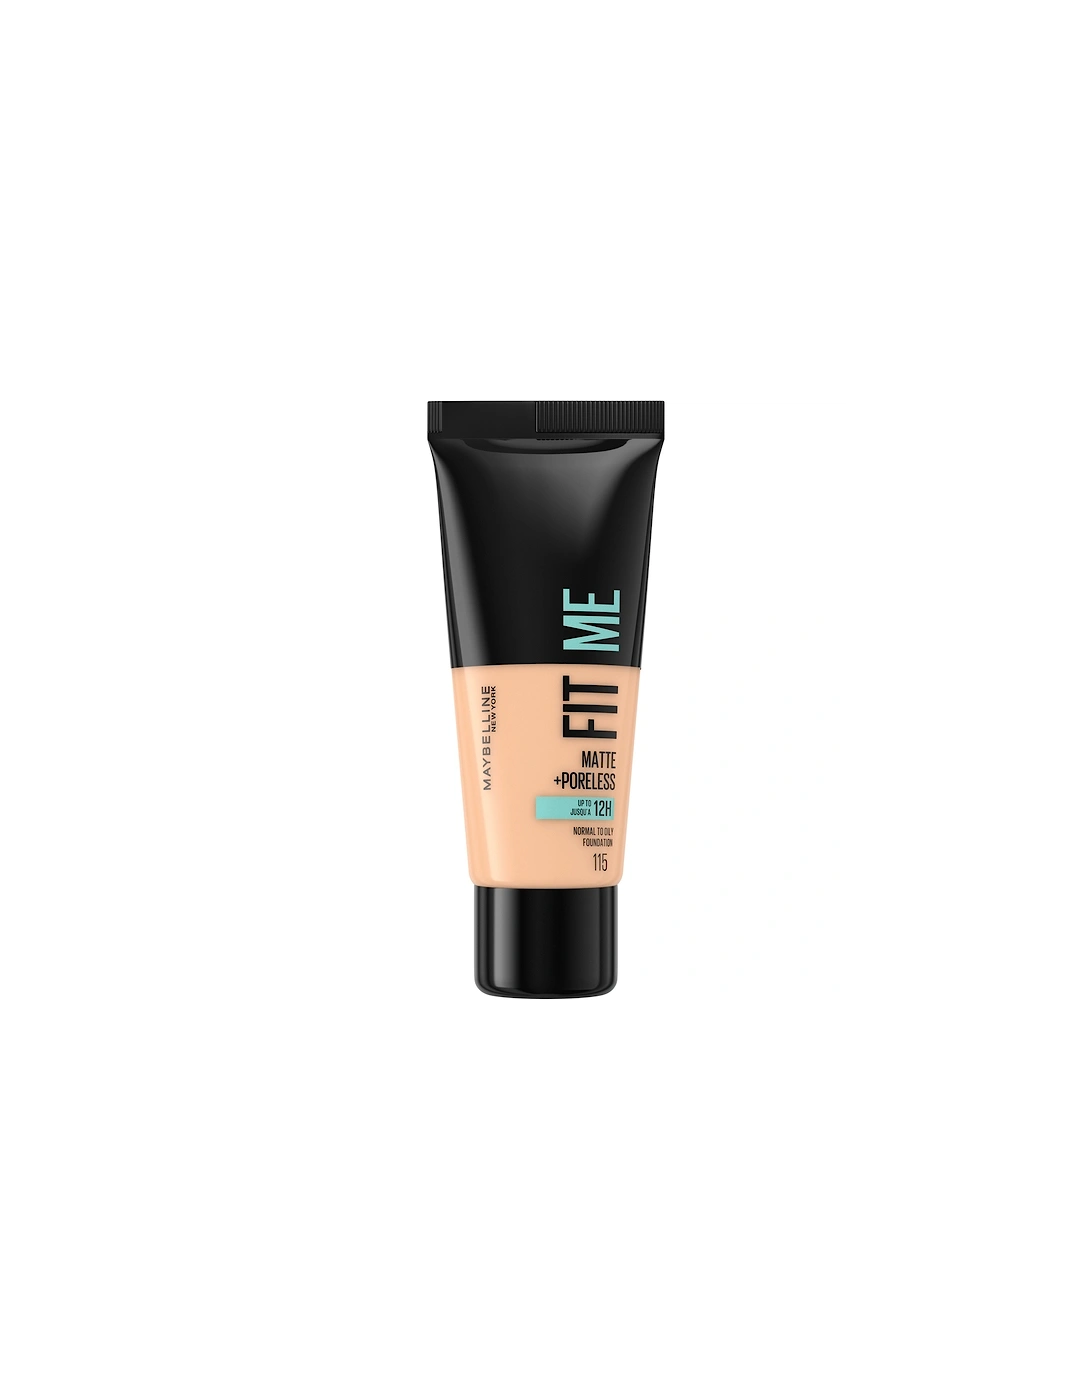 Fit Me! Matte and Poreless Foundation - 115 Ivory - - Fit Me! Matte and Poreless Foundation 30ml (Various Shades) - Foundation - Fit Me! Matte and Poreless Foundation 30ml (Various Shades) - Tina - Fit Me! Matte and Poreless Foundation 30ml (Various Shades) - Jo, 2 of 1